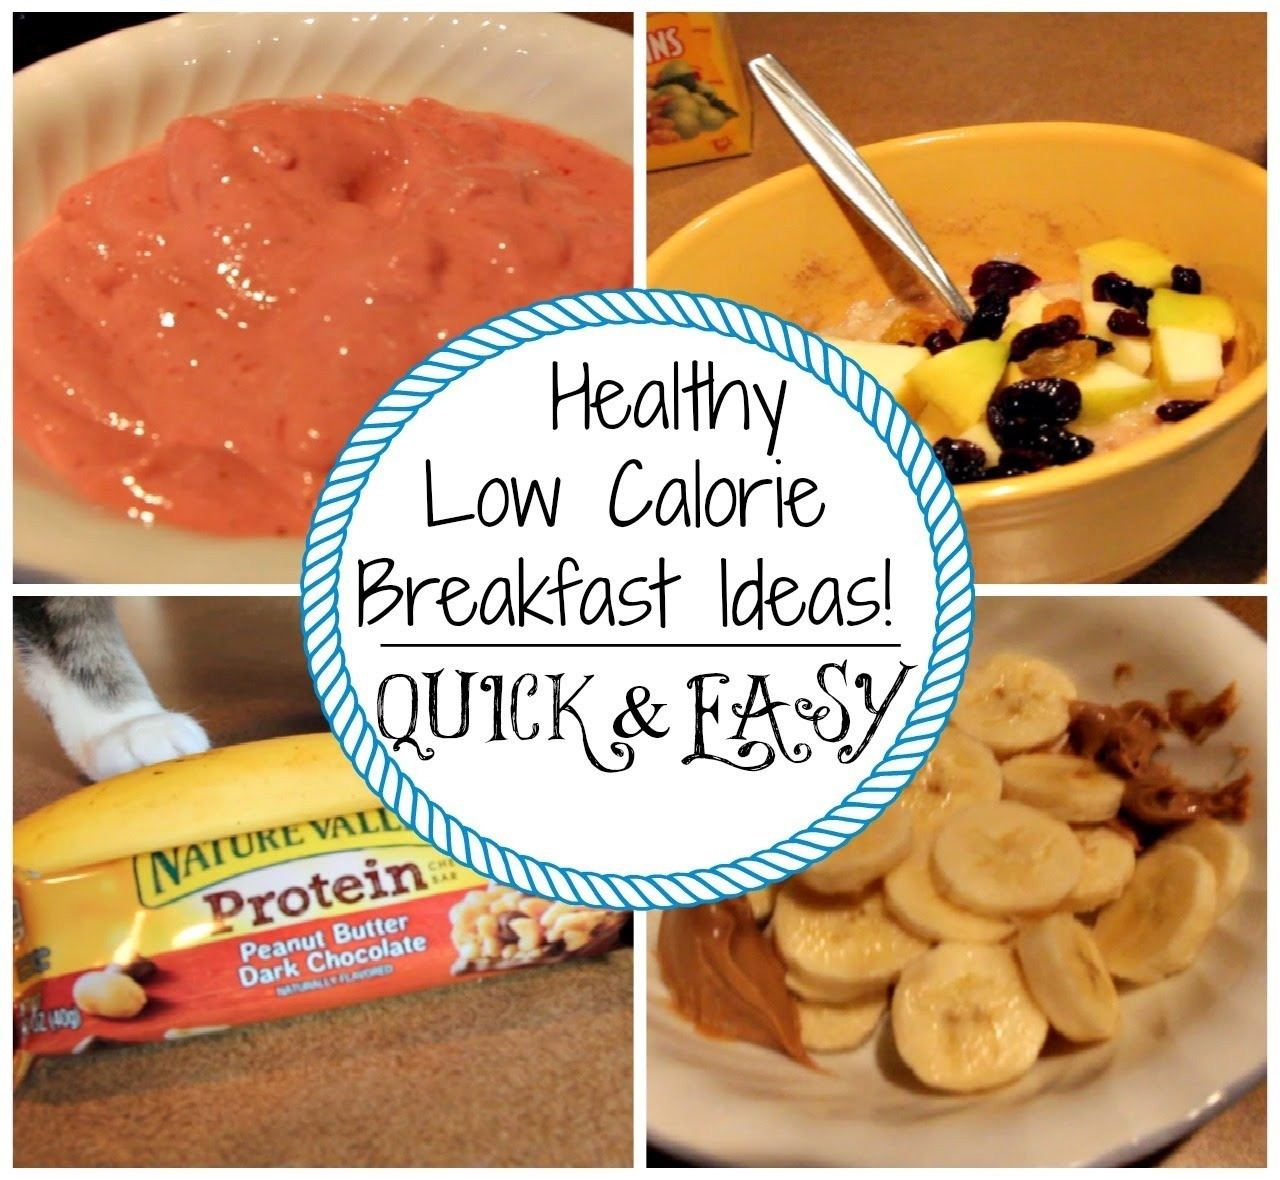 Healthy Low Calorie Breakfast
 Low Calorie Breakfast IdeasWritings and Papers